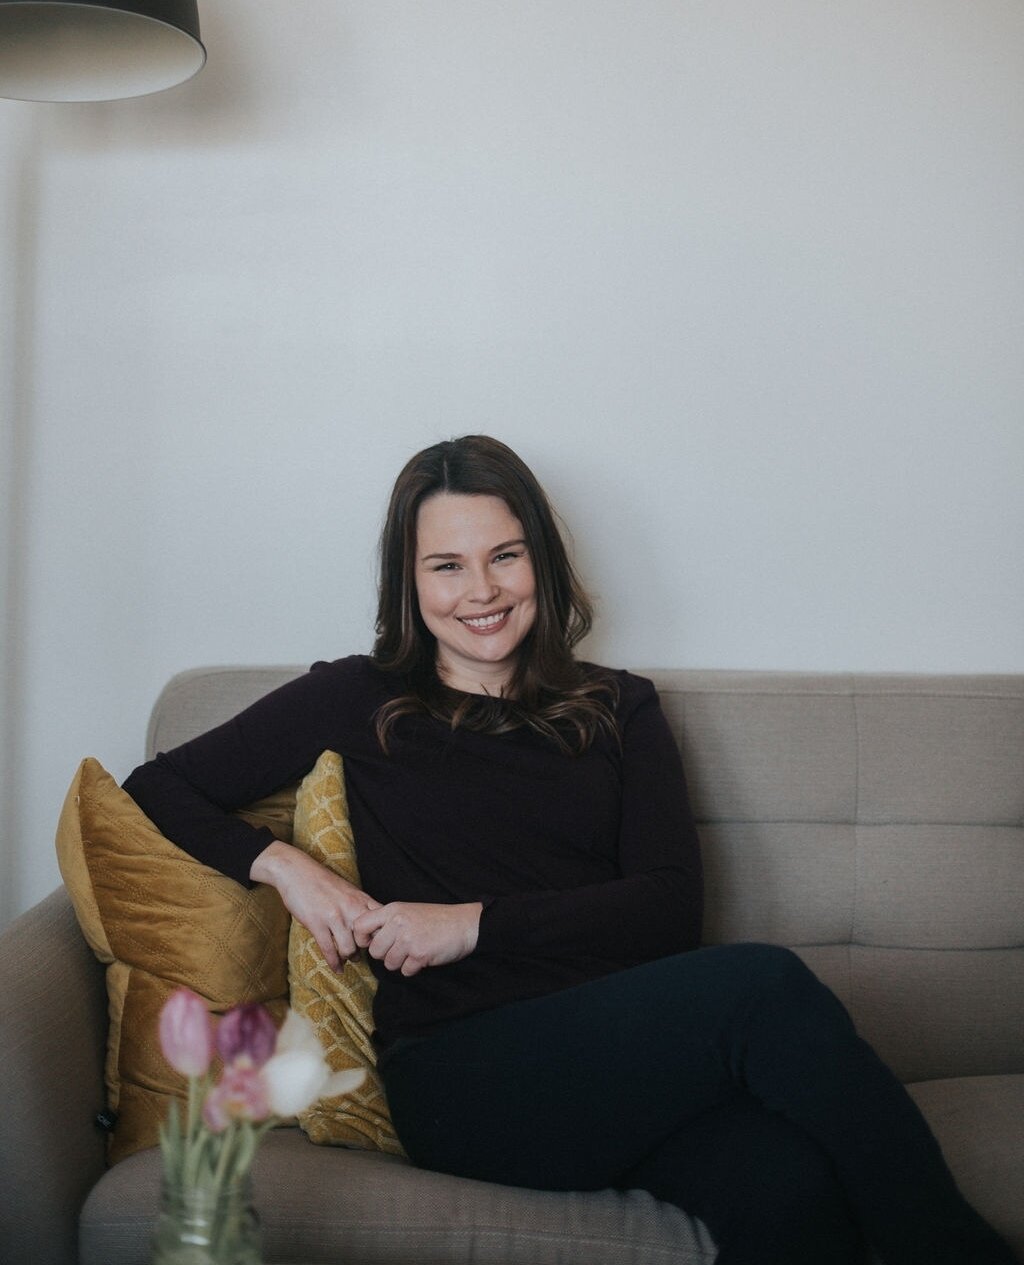 Have you met Alison? She has been a Therapist at Thrive for 2 years now! ⁠
⁠
A little from her bio: &quot;My goal is to support folks to achieve their goals by drawing on their own strength and resilience. I use skills of empathy, compassion and humo